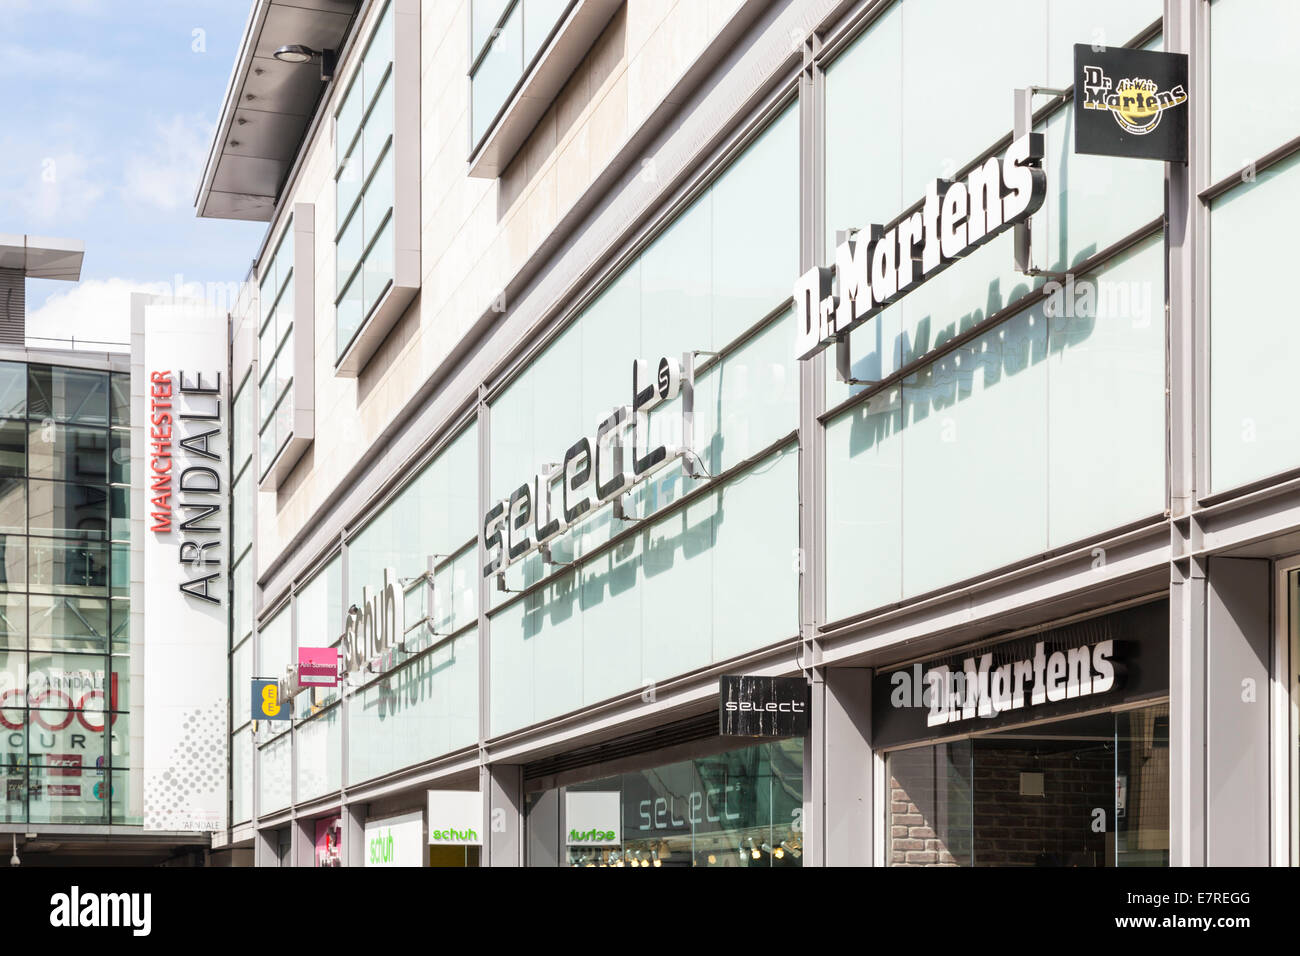 Dr Marten's, Select and Schuh stores at the Arndale Shopping Centre, Manchester, England, UK Stock Photo